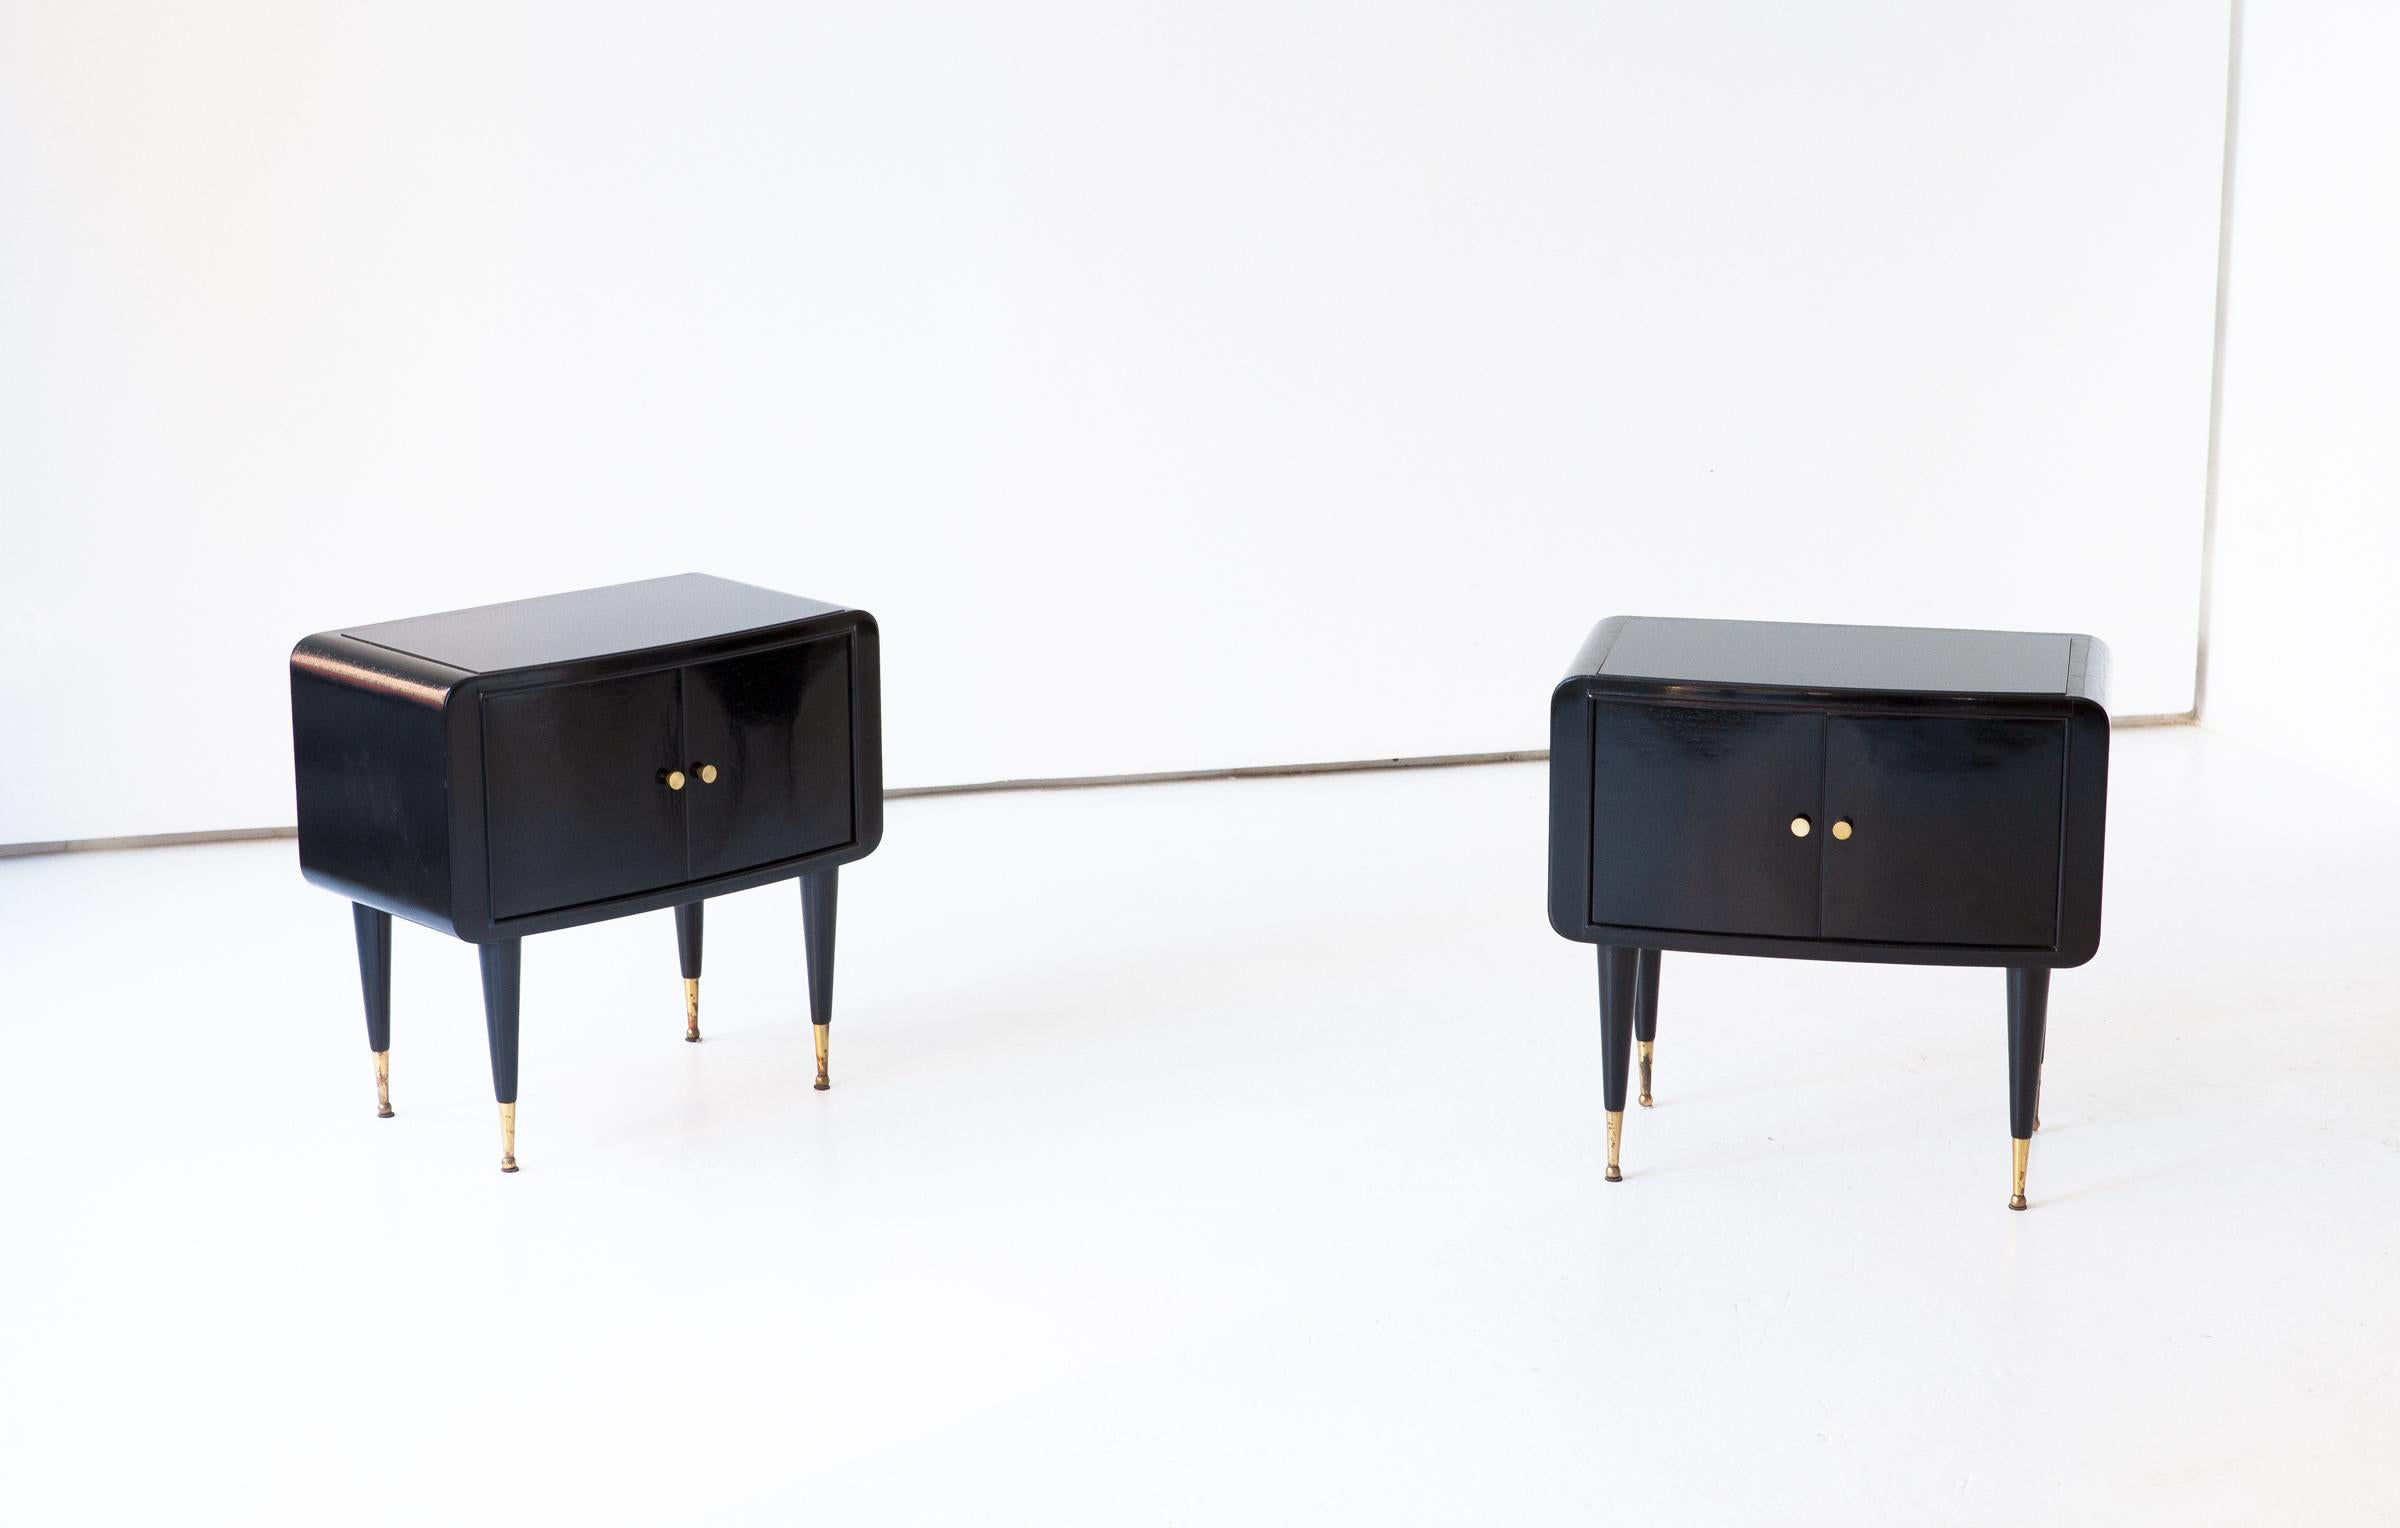 Set of two nightstands, manufactured in Italy in 1950s
These two side tables has made of black polished wood, black retrolacquered glass top and brass and handles feets
Airy and modern design,
These are a Mid-Century Modern